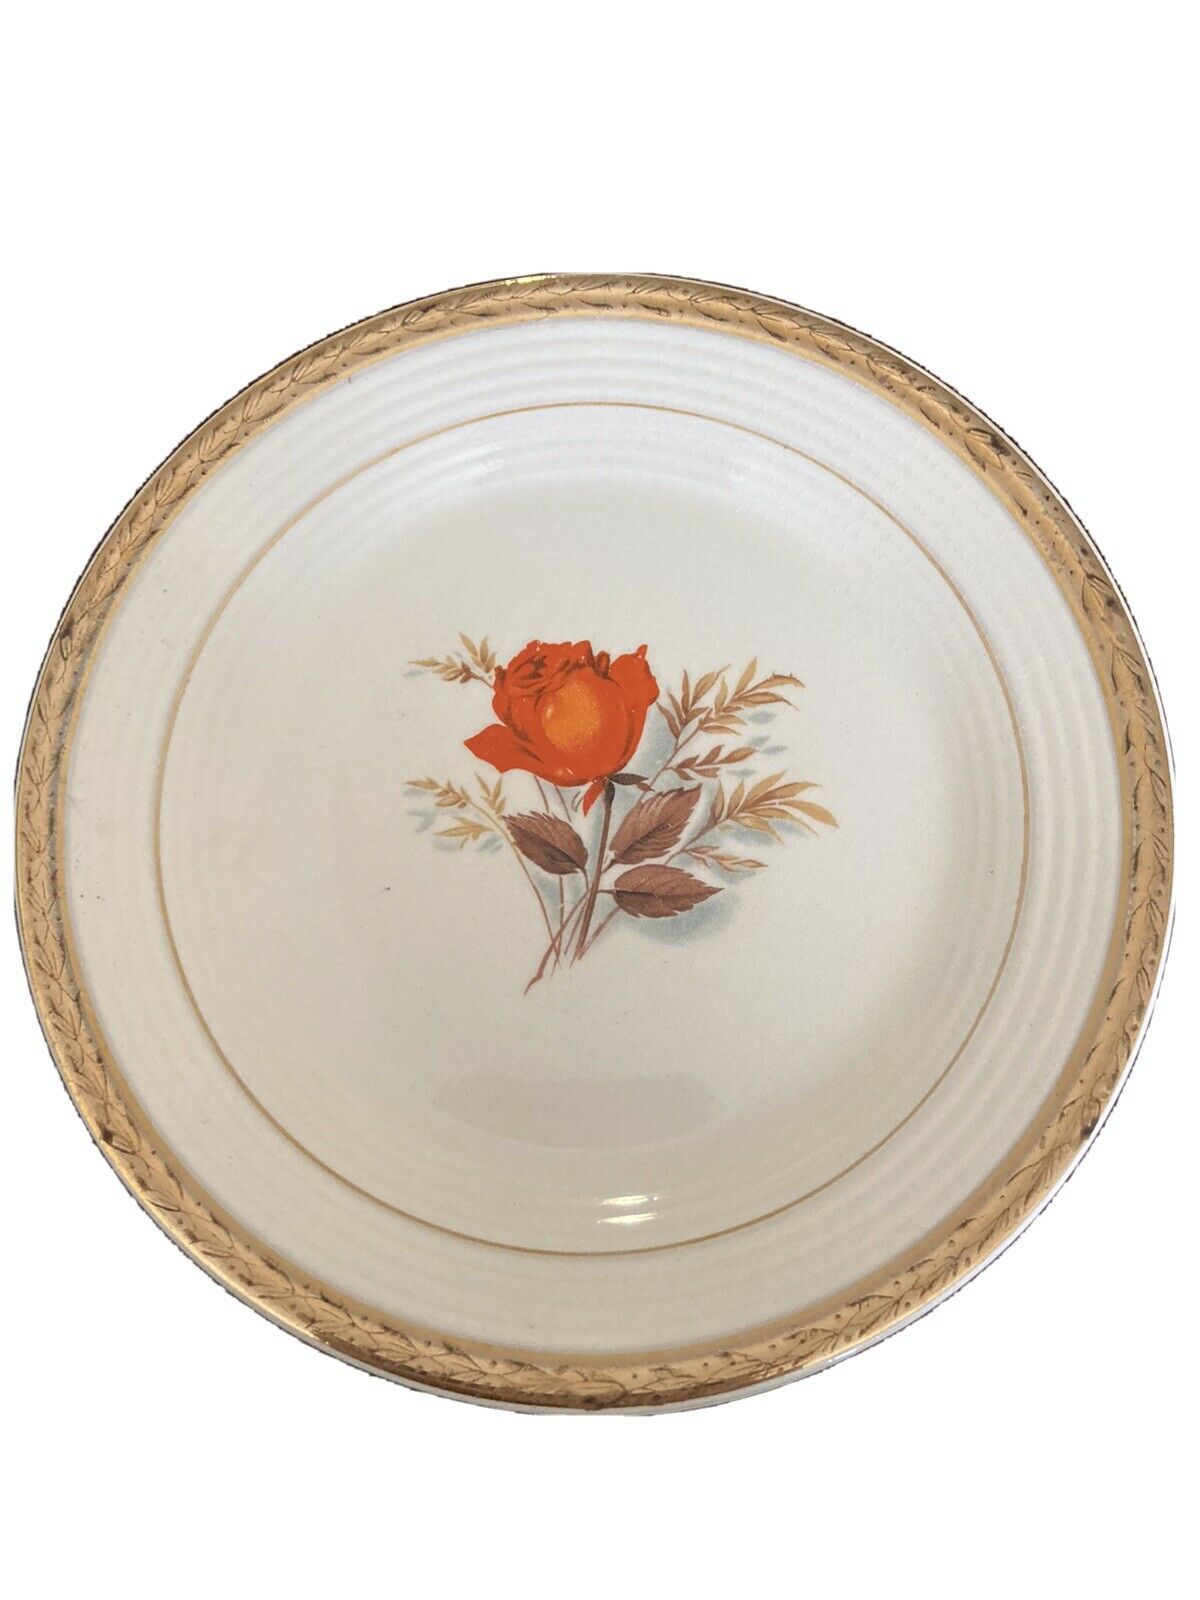 TRIUMPH American Limoges 22k gold vermillion rose Belvedere T plate dish red